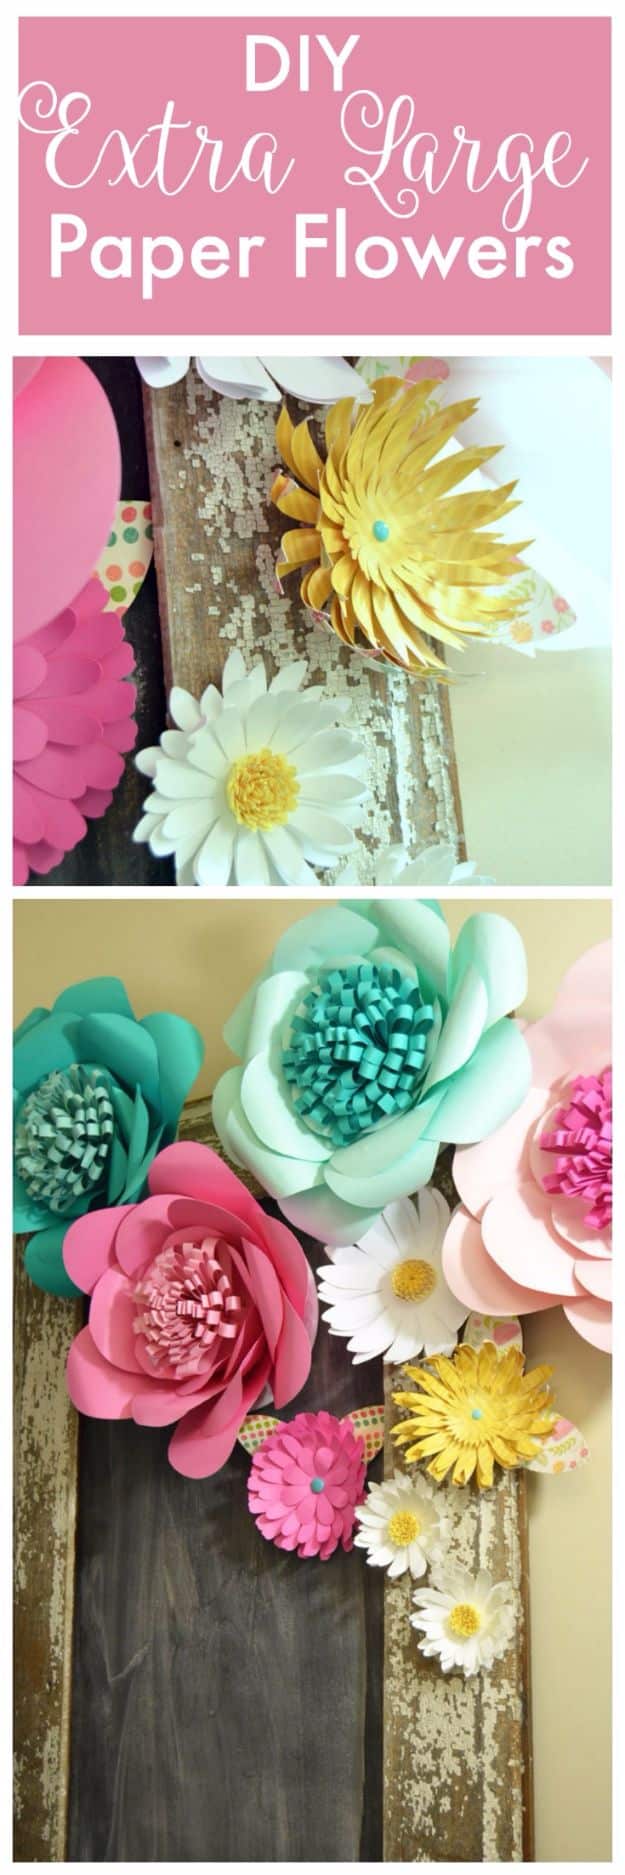 Giant Paper Flower for a DIY Wedding Backdrop - Craft Tutorial